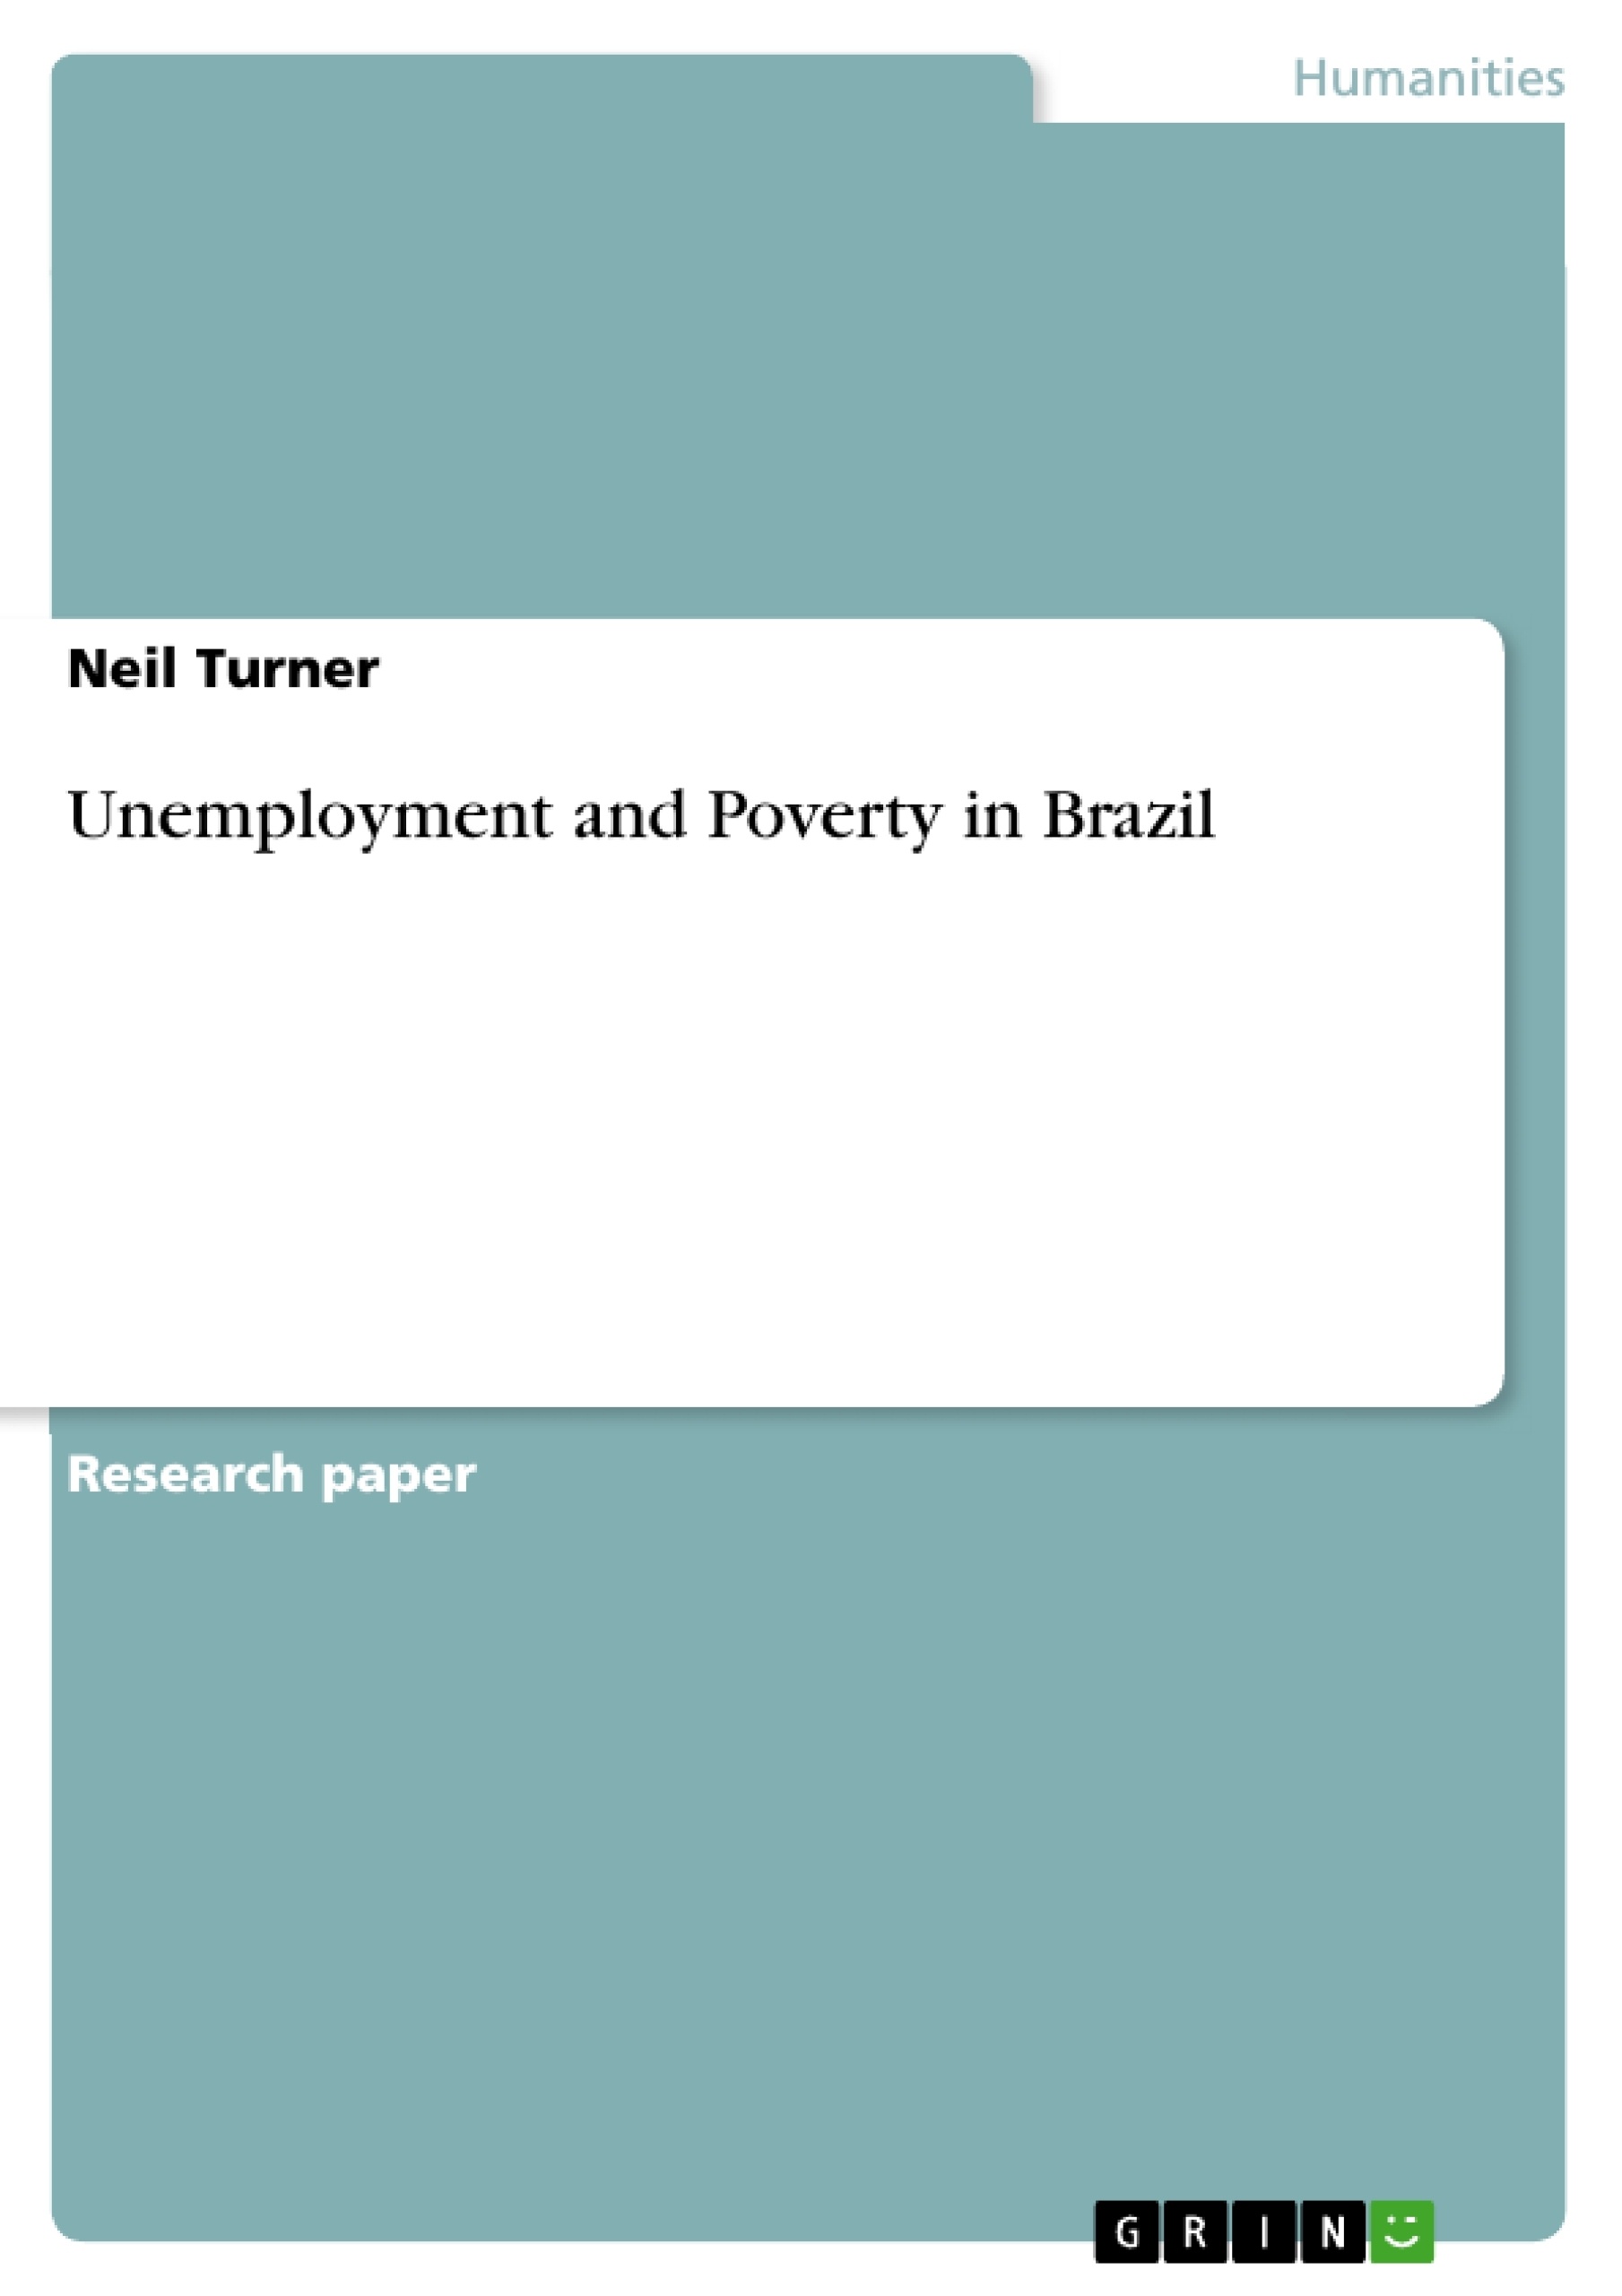 Título: Unemployment and Poverty in Brazil